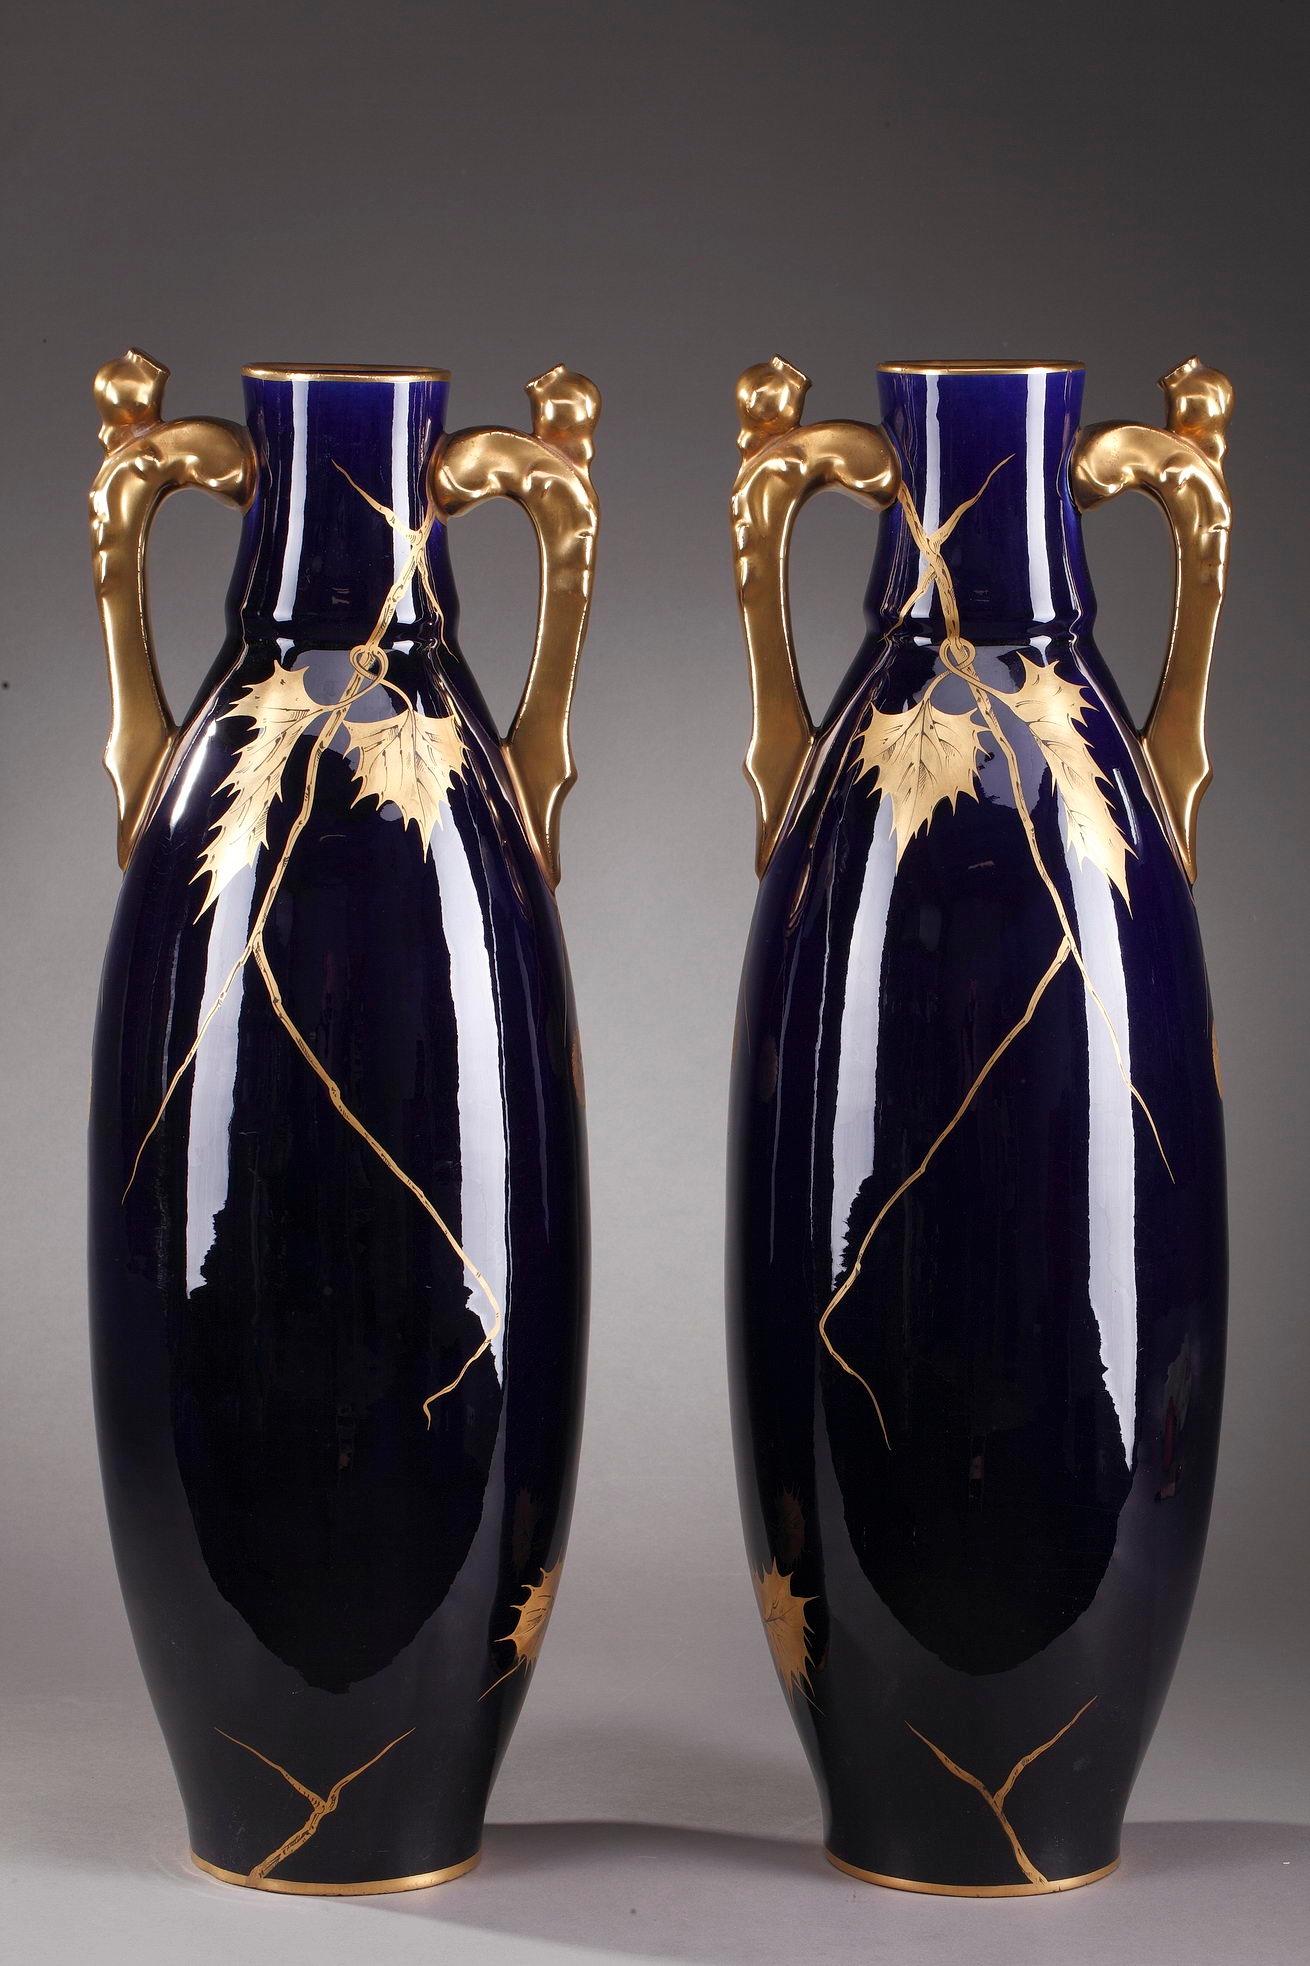 Large porcelain vases crafted by Gustave Asch in the late 19th century. Each vase is highlighted with cascading chestnut leaves and chestnuts in their bugs painted in gold on dark blue called Bleu de Tours background. The handles are entirely